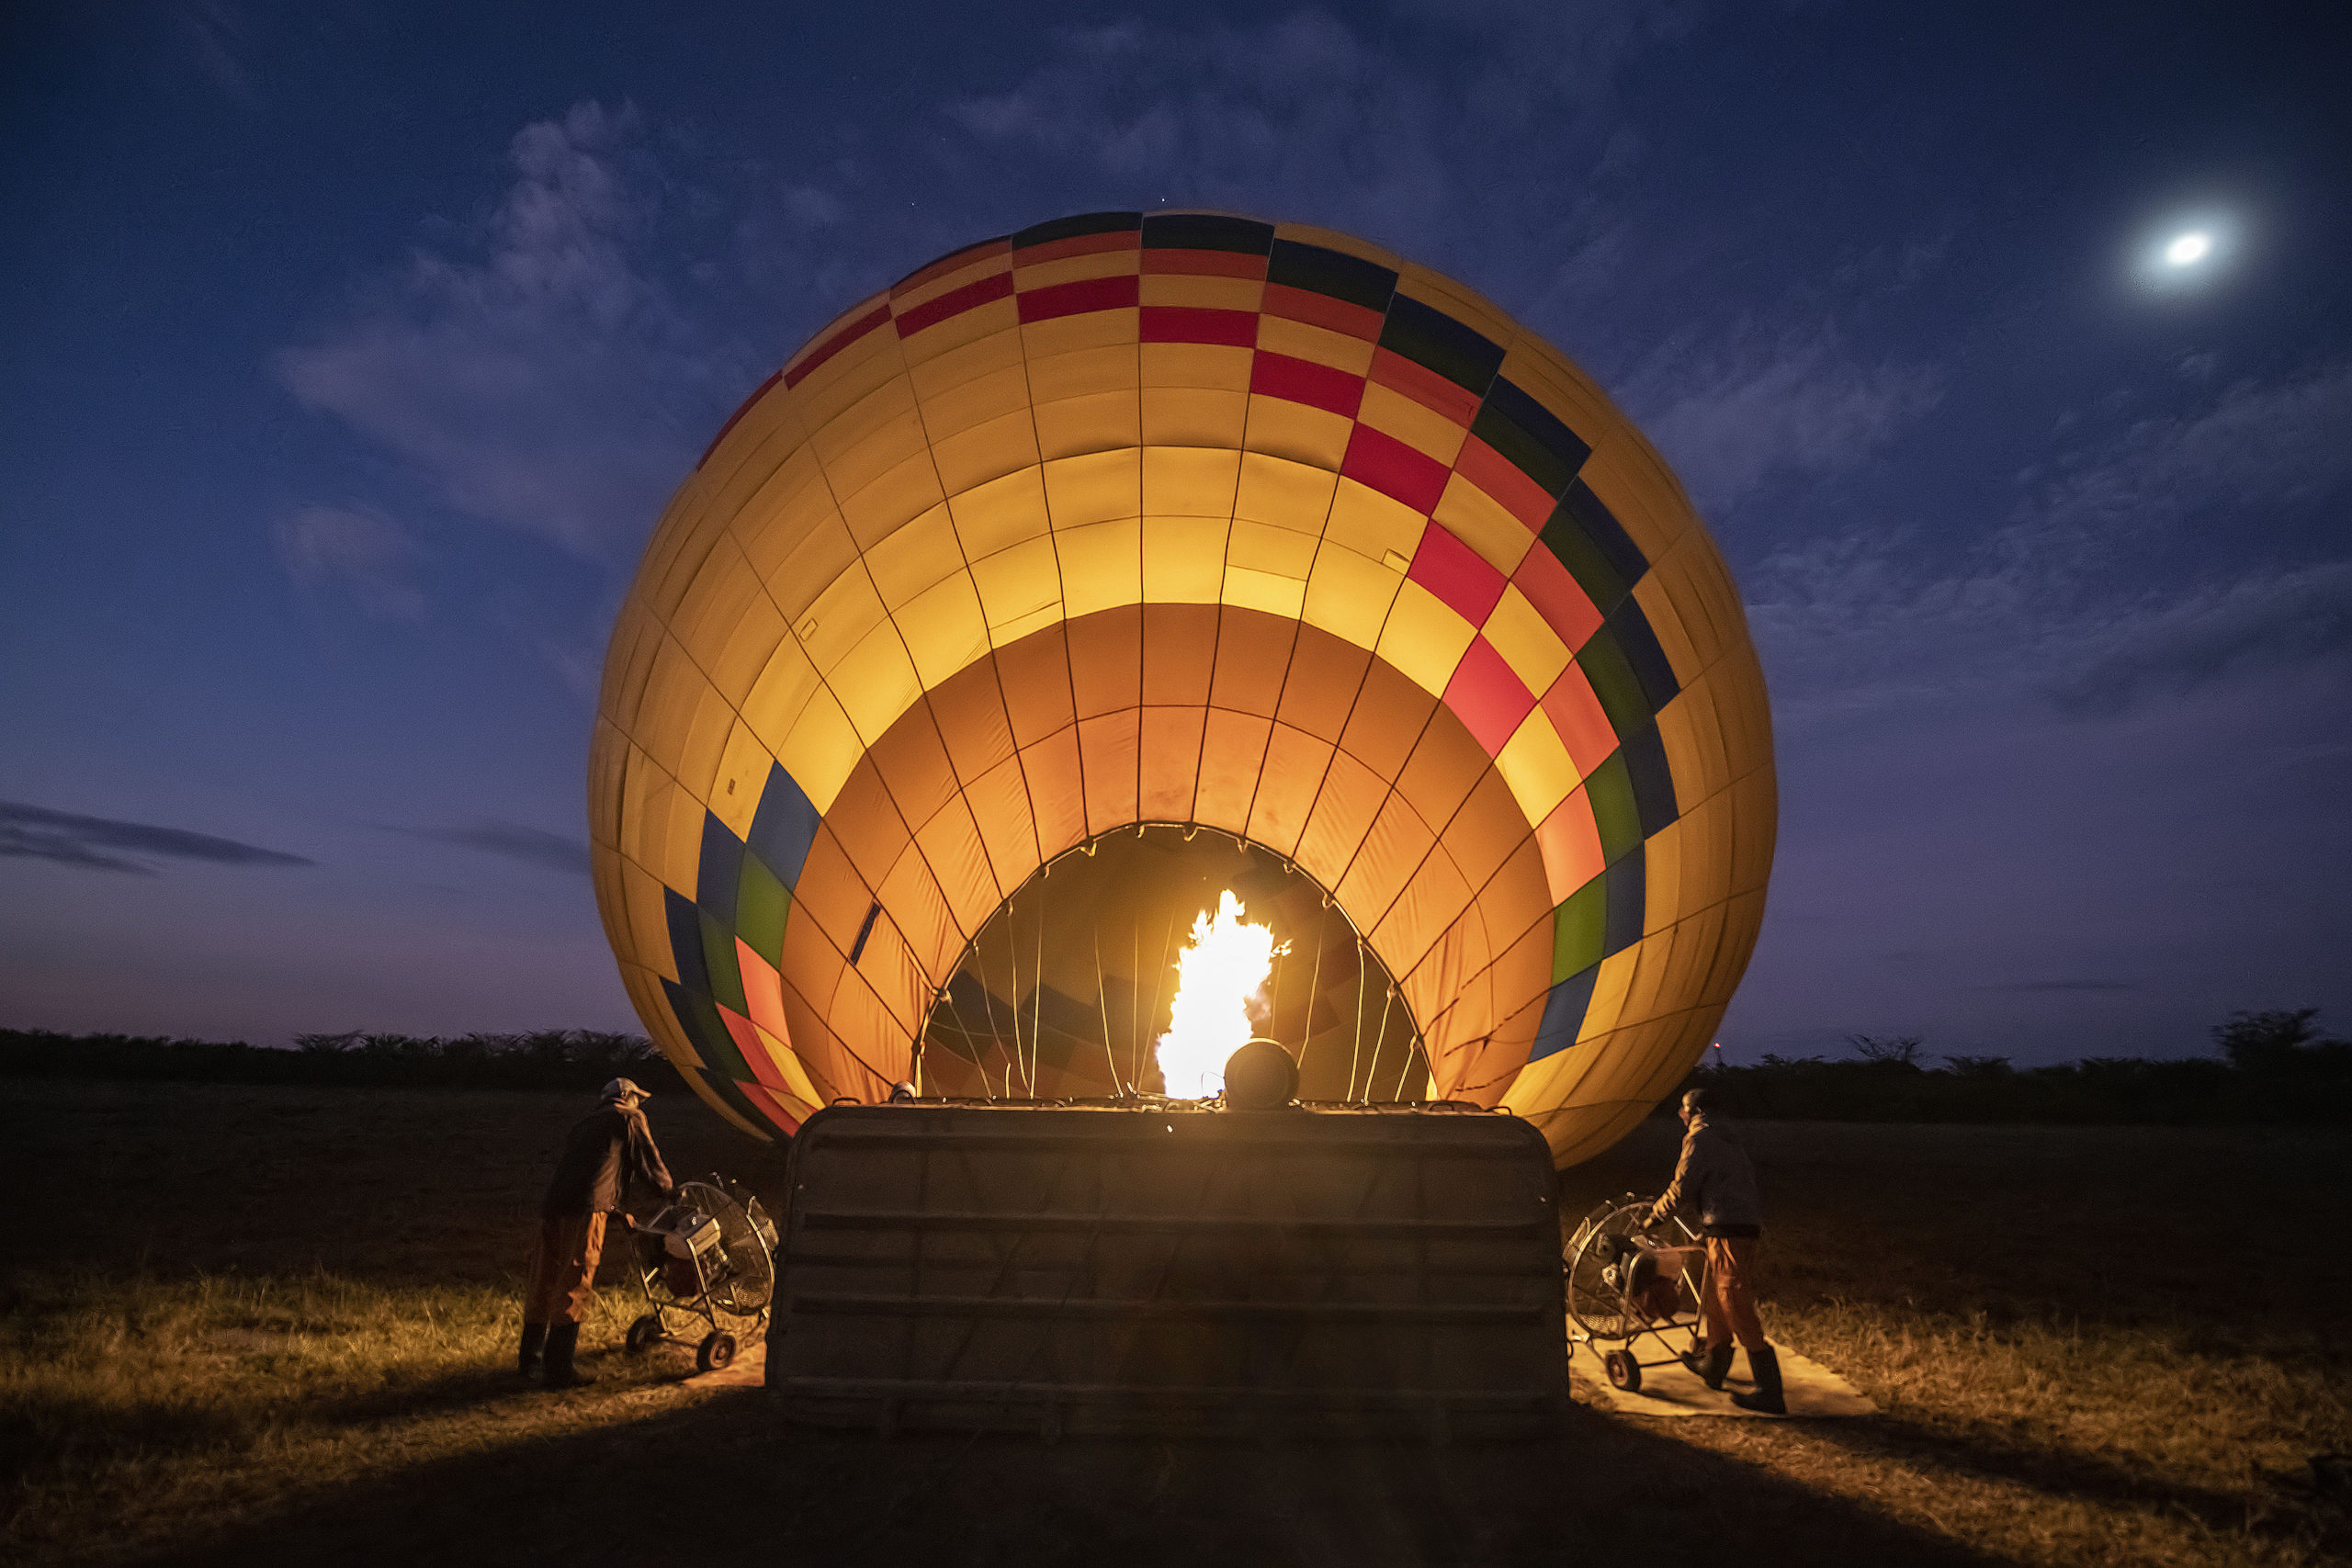 Members of the Africa Fire Mission took a hot air balloon ride at the Fig Tree Lodge in the Maasai Mara in Nairobi, Kenya.